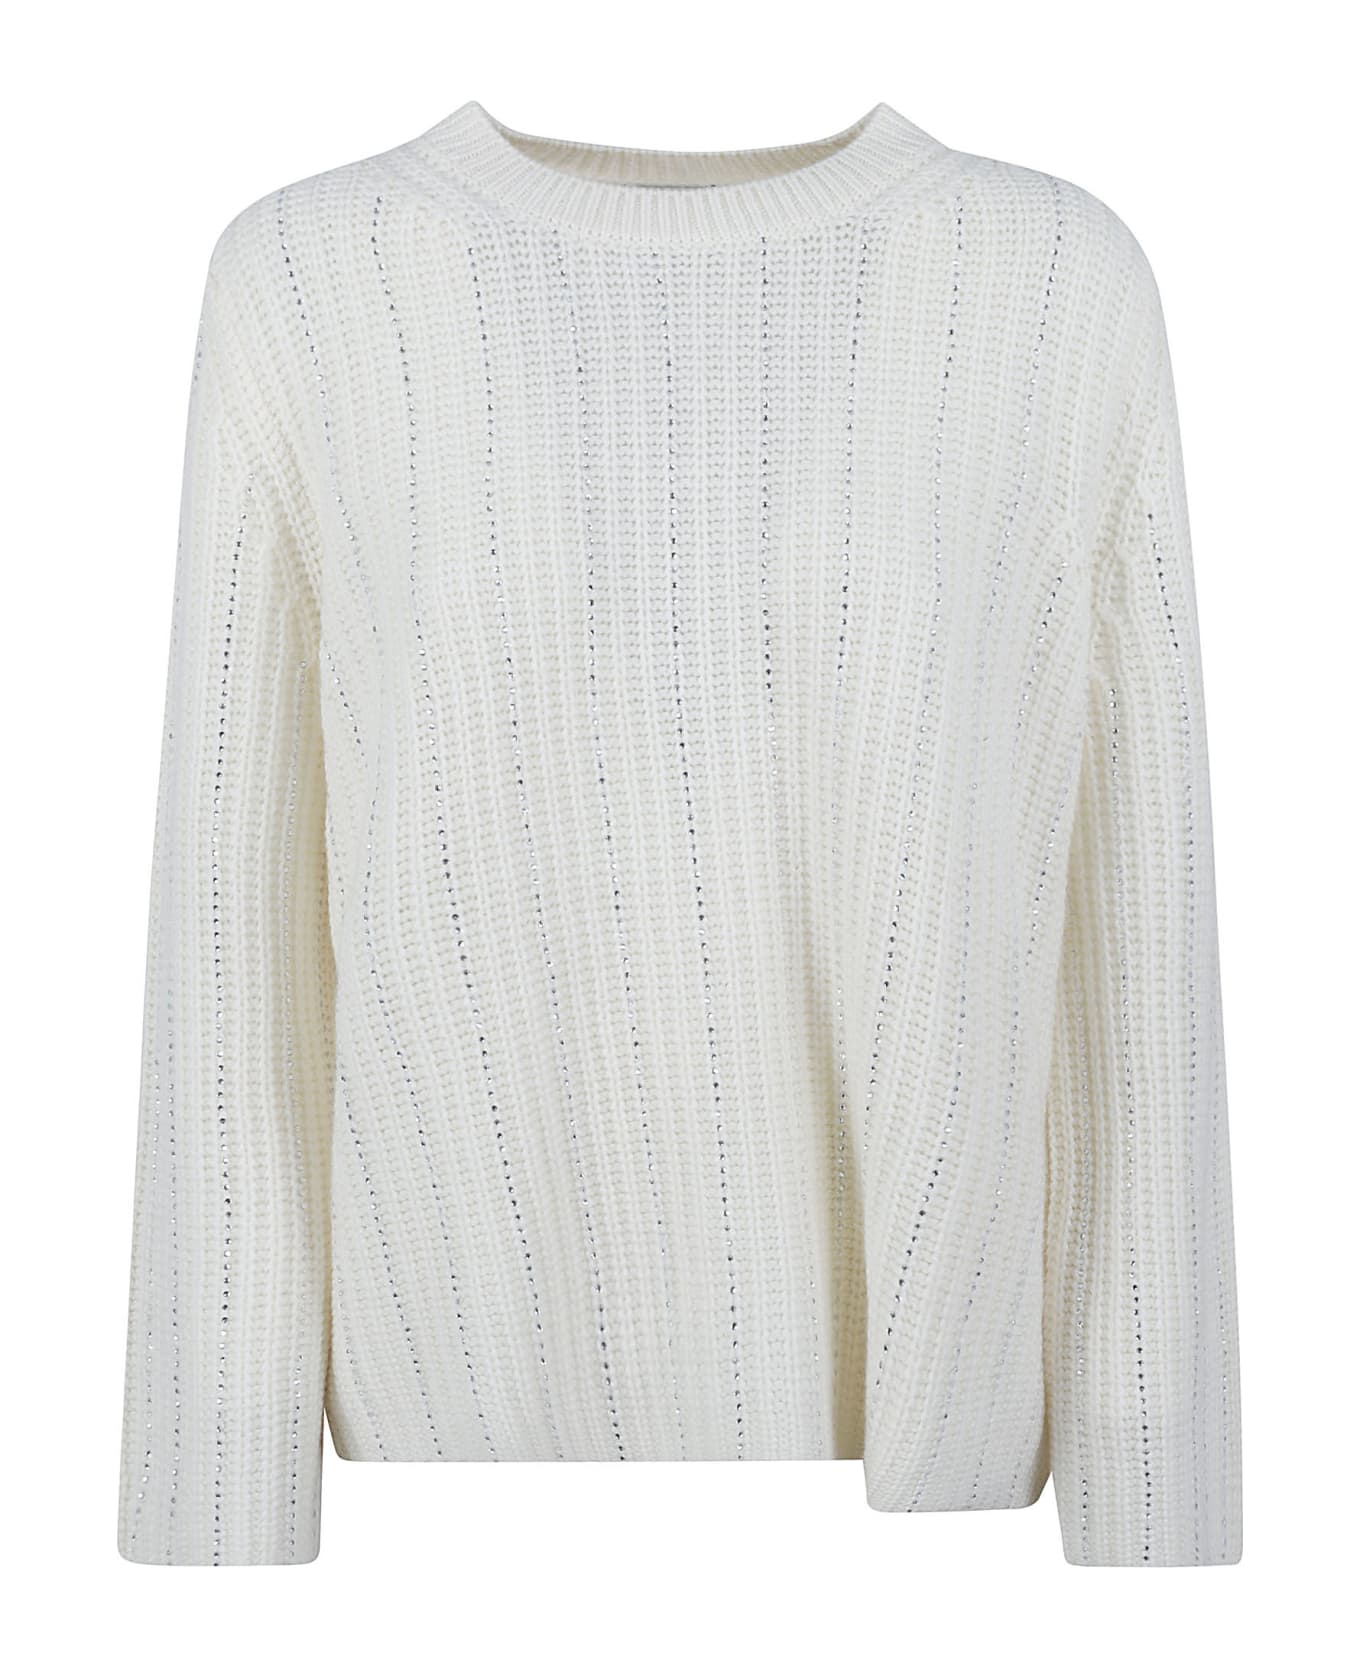 Allude Crystal Embellished Stripe Sweater - White